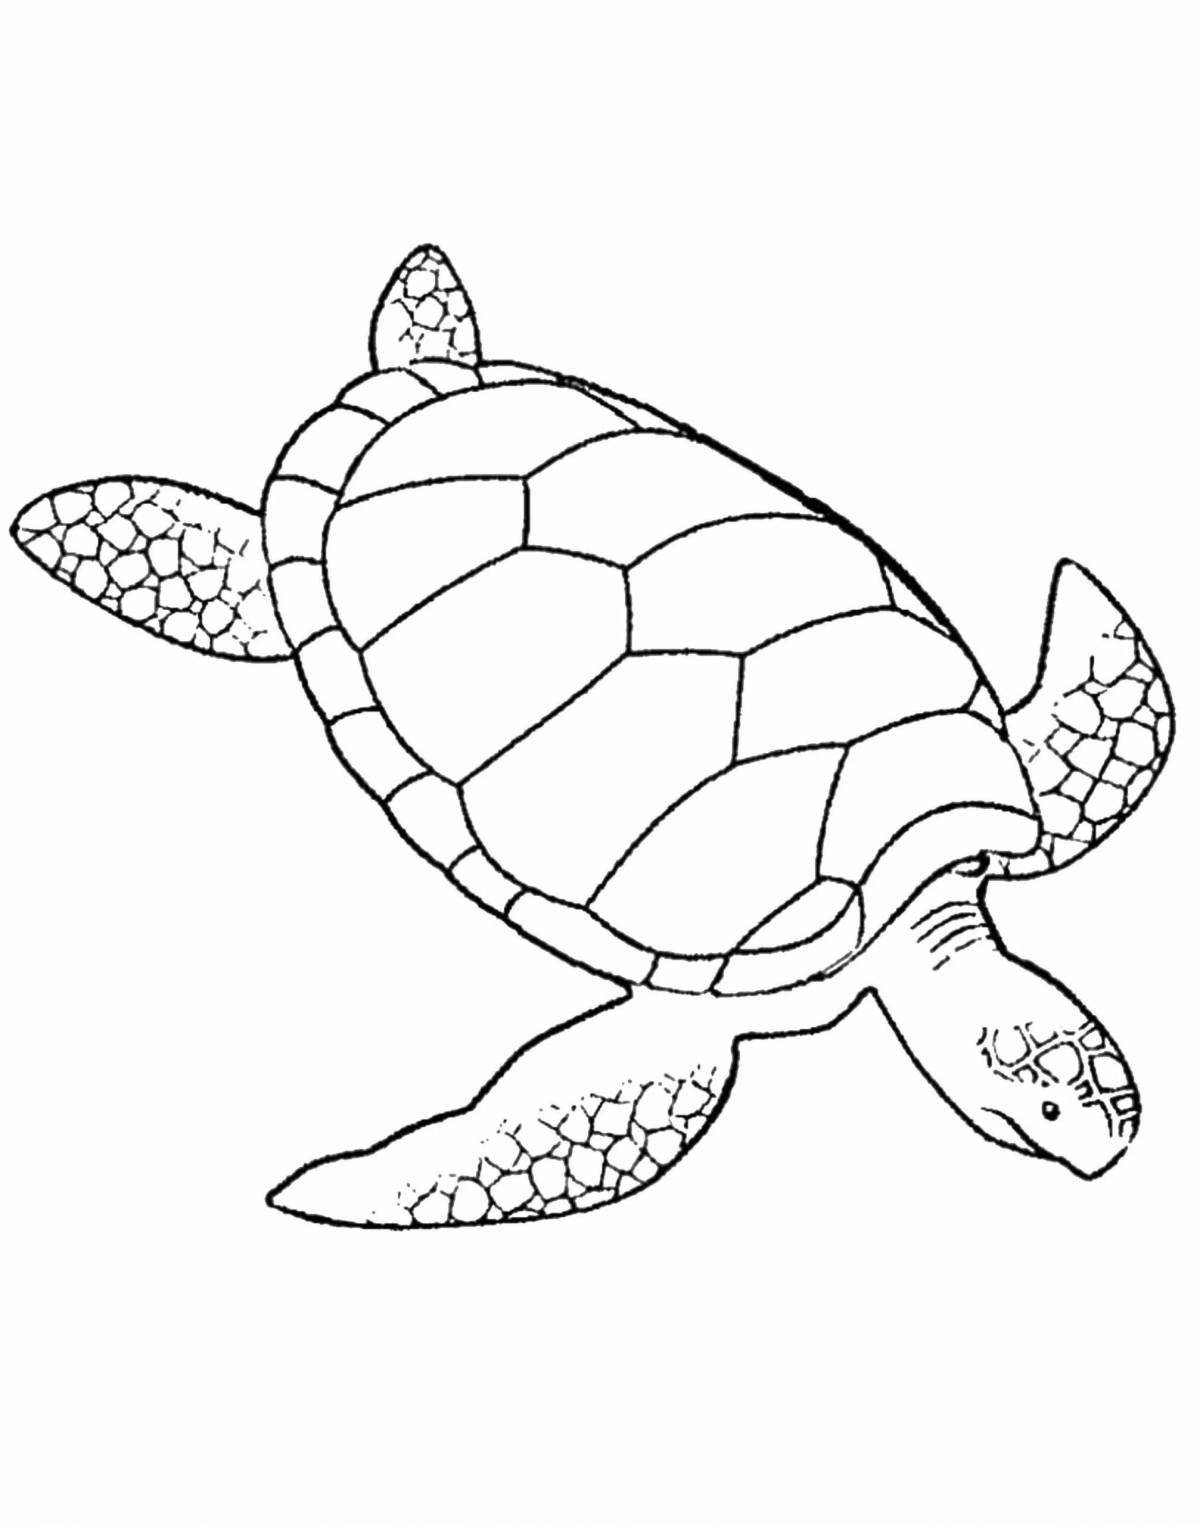 Coloring page dazzling turtle